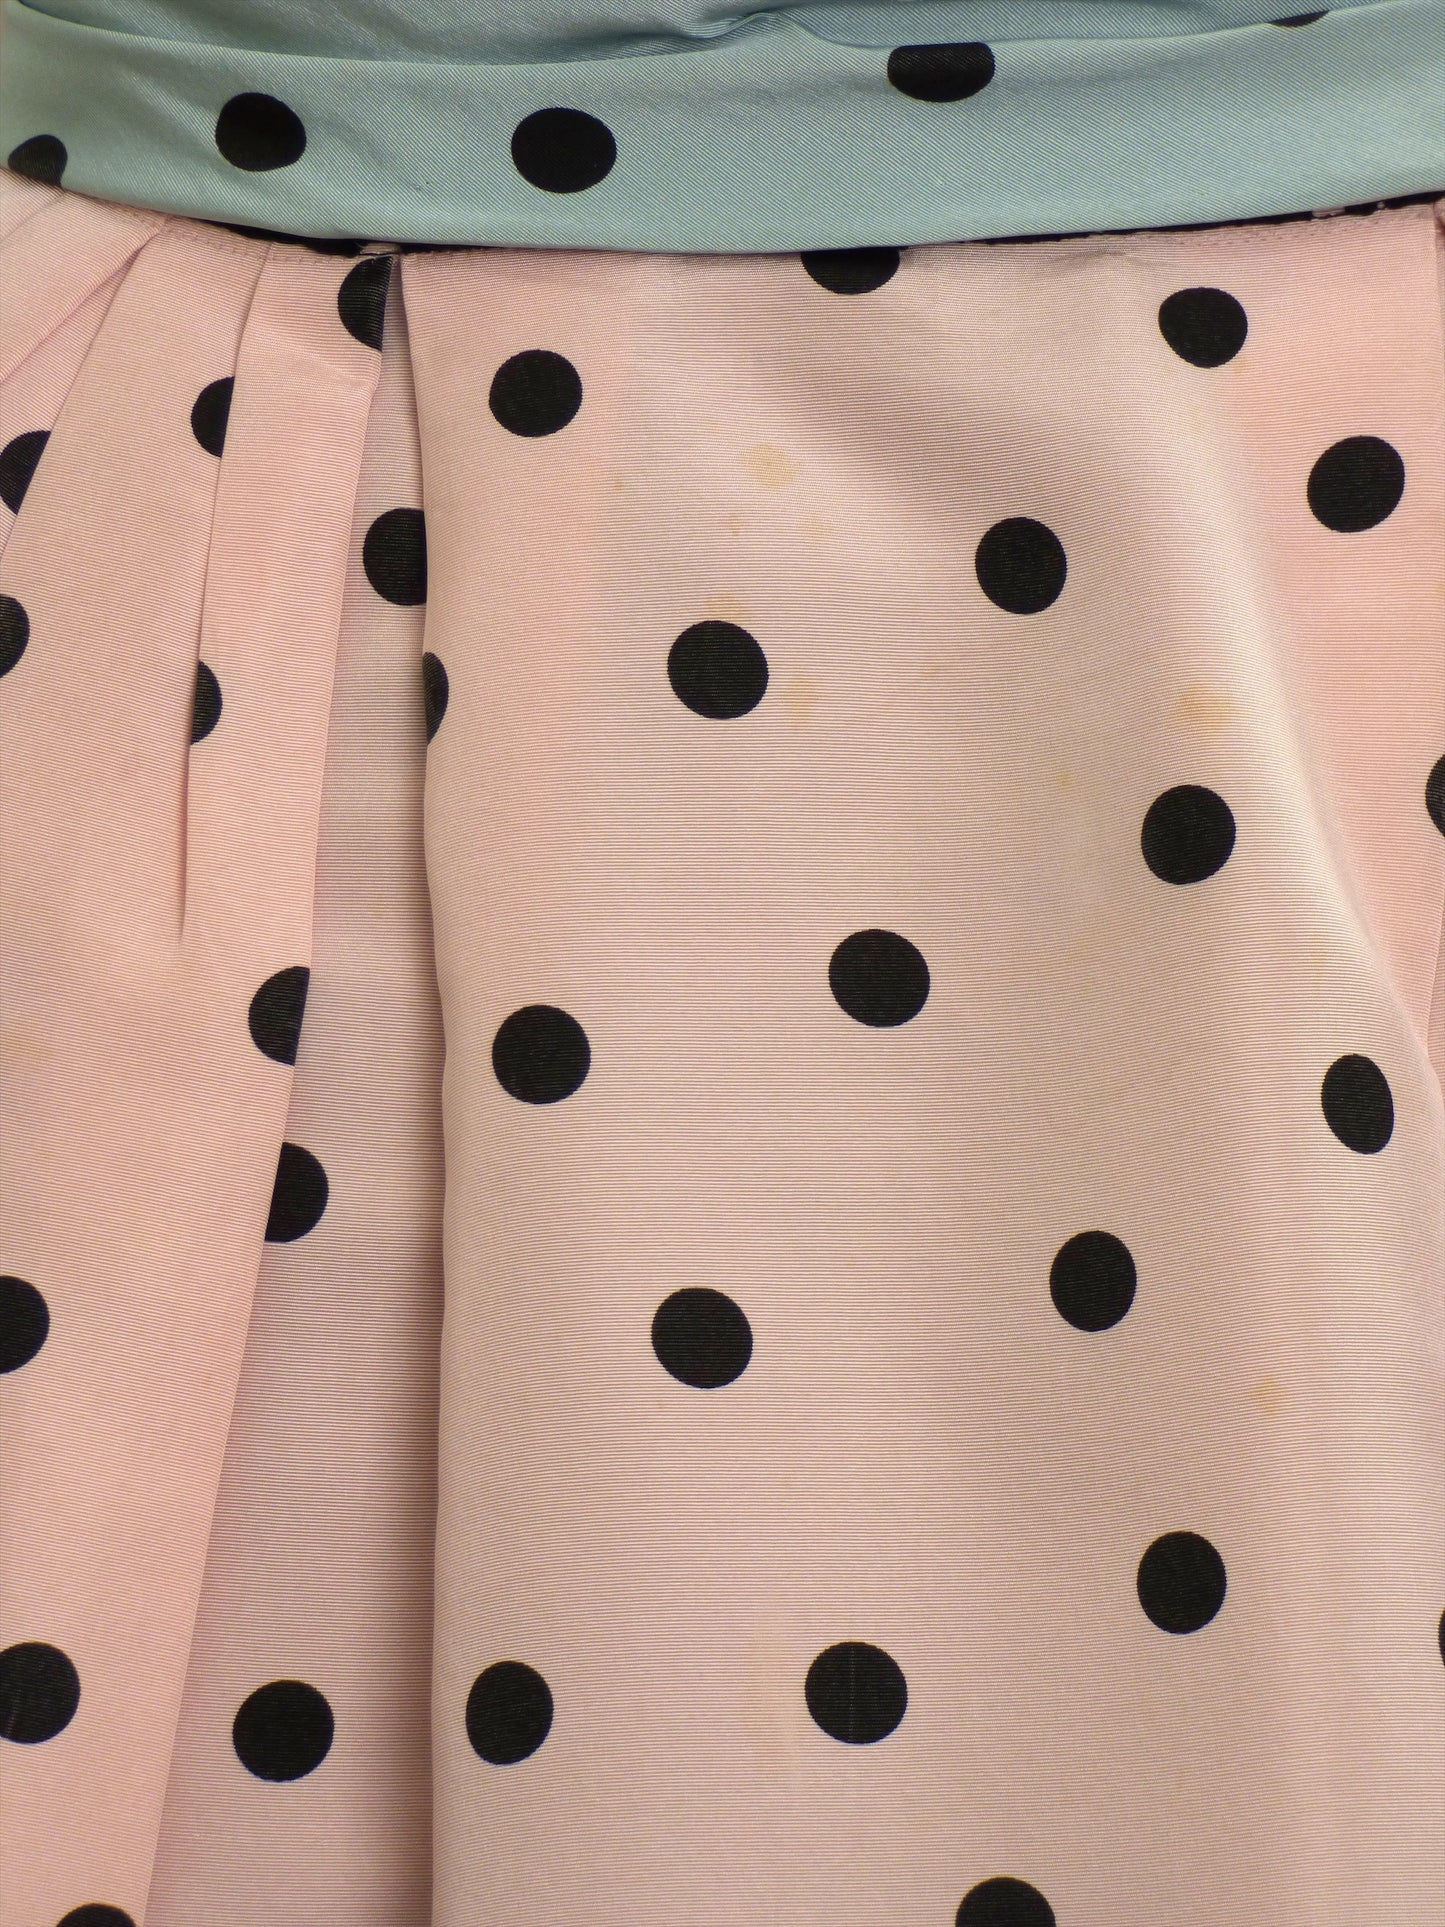 CHANEL-AS IS 1988 Polka Dot Party Dress, Size-4